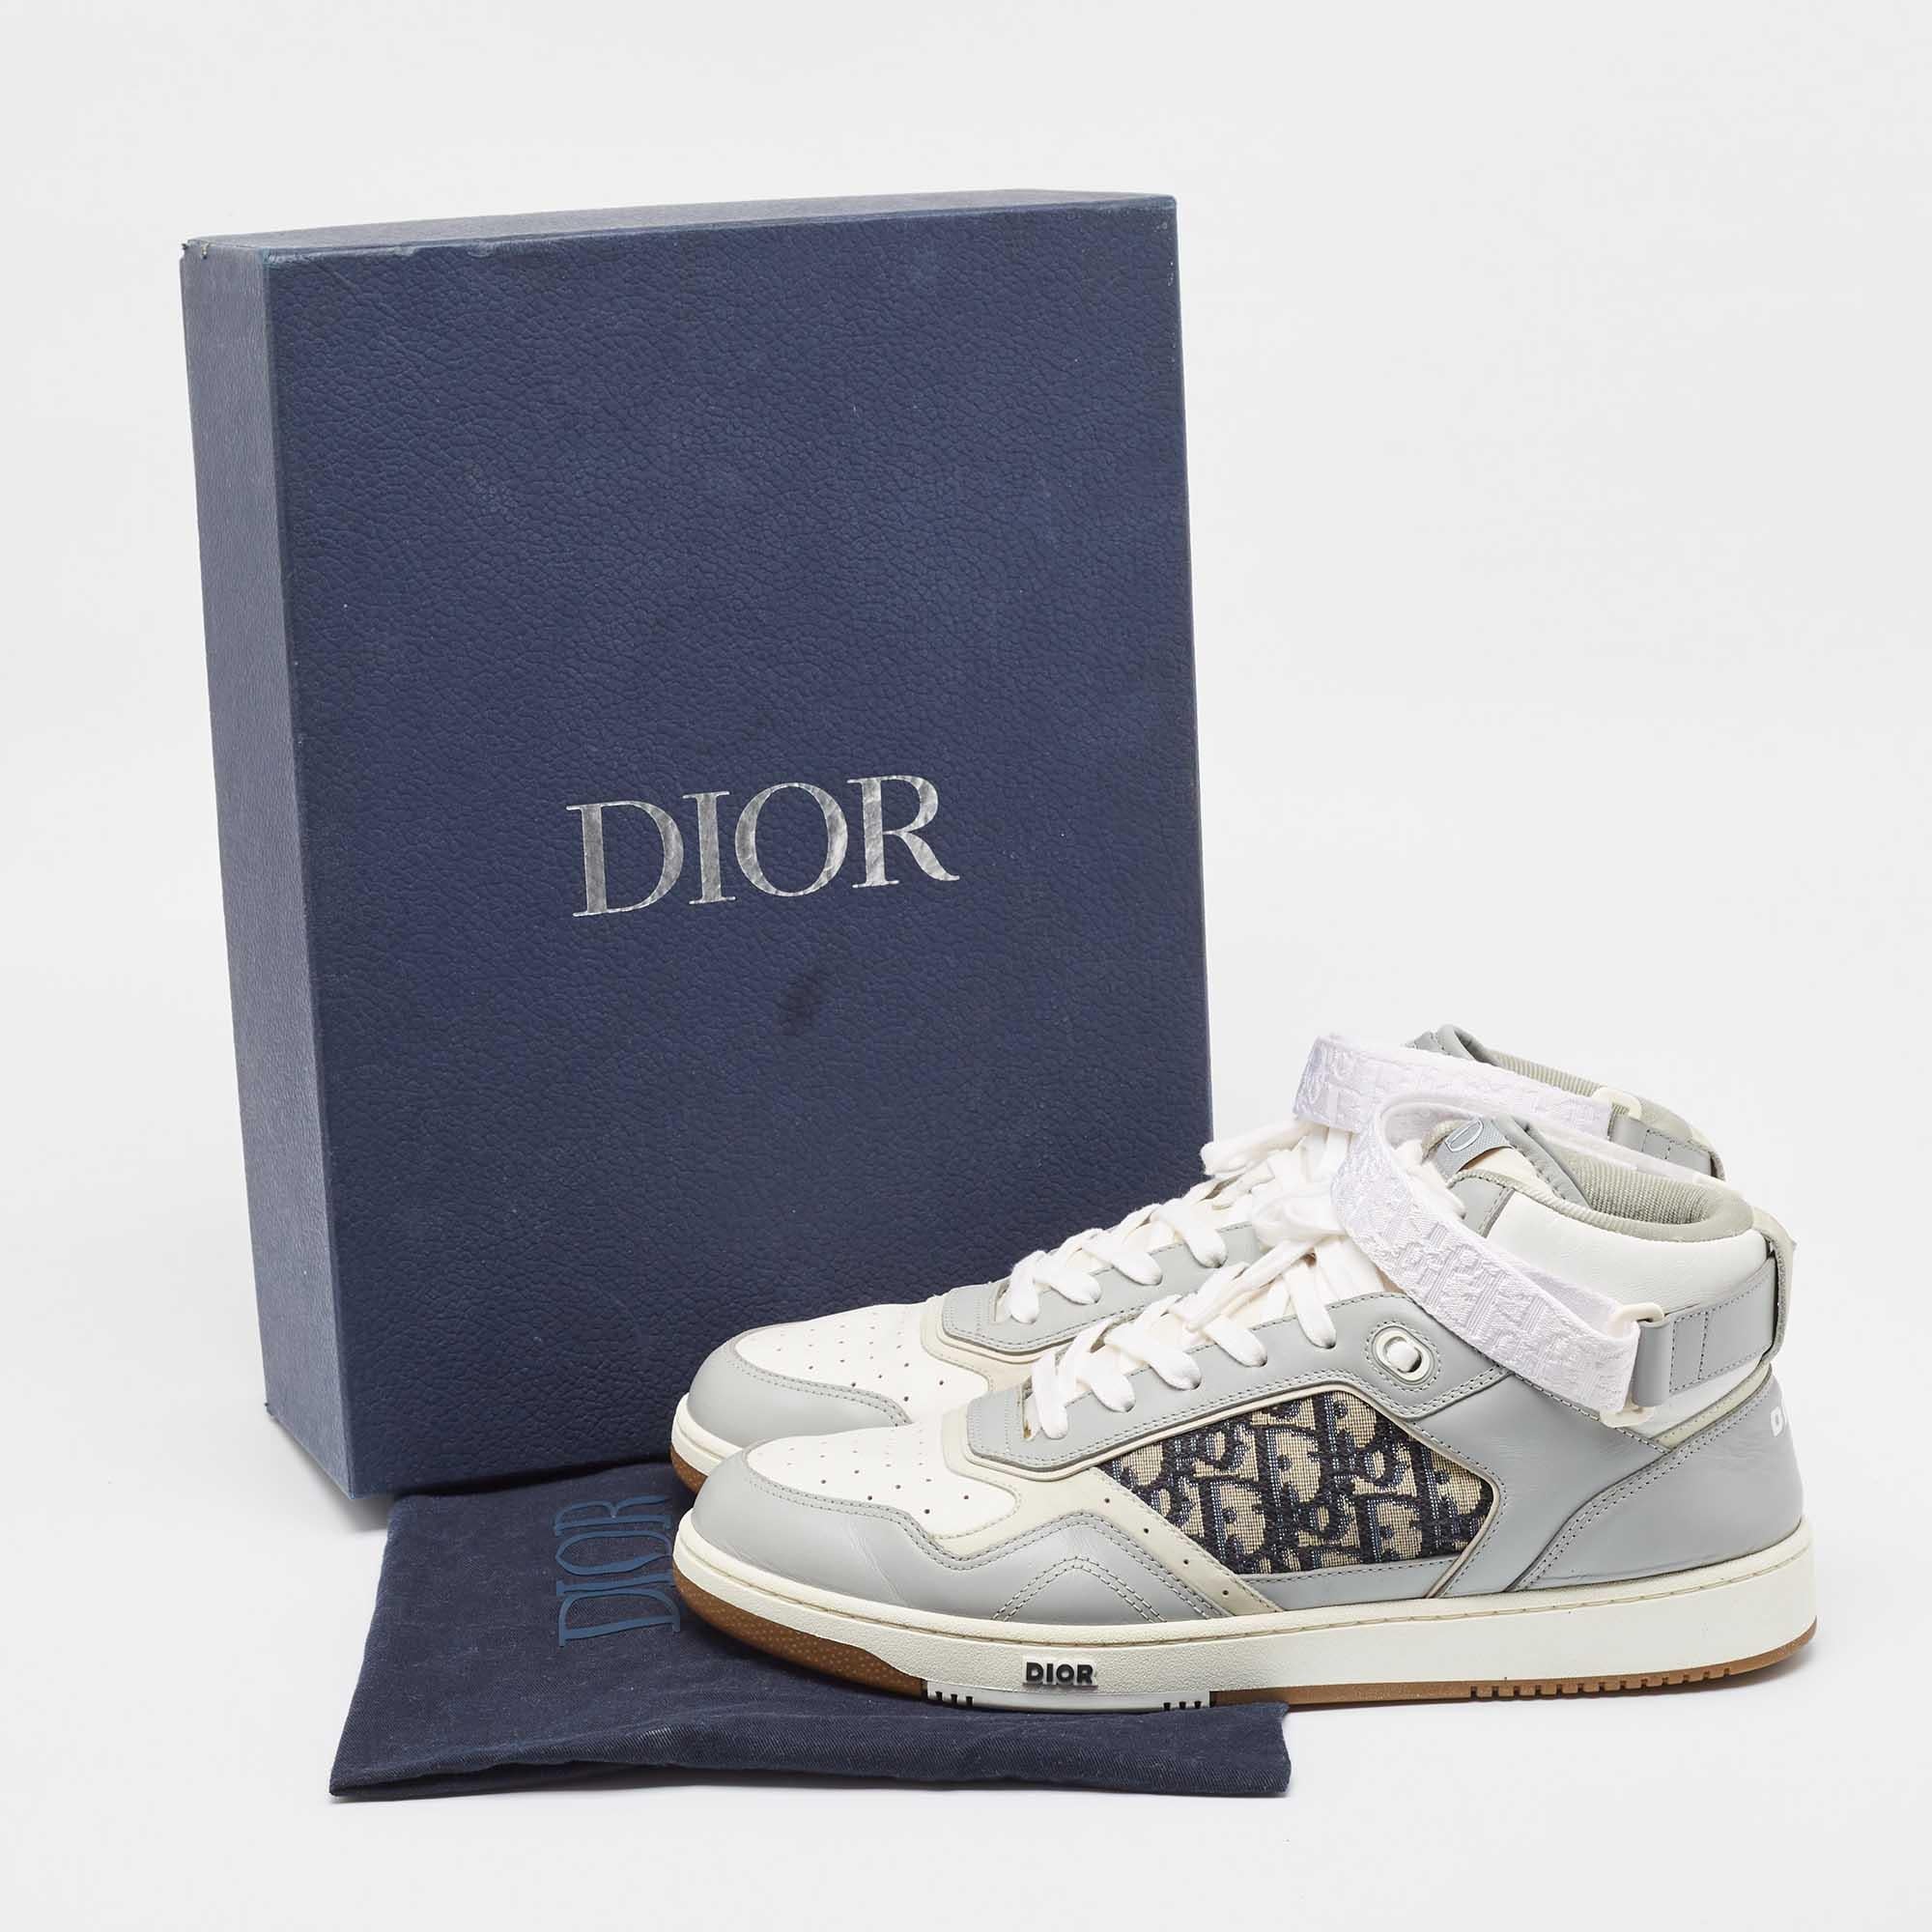 DIOR Grey/White Leather and Oblique Jacquard B27 High Top Sneakers Size 47 5